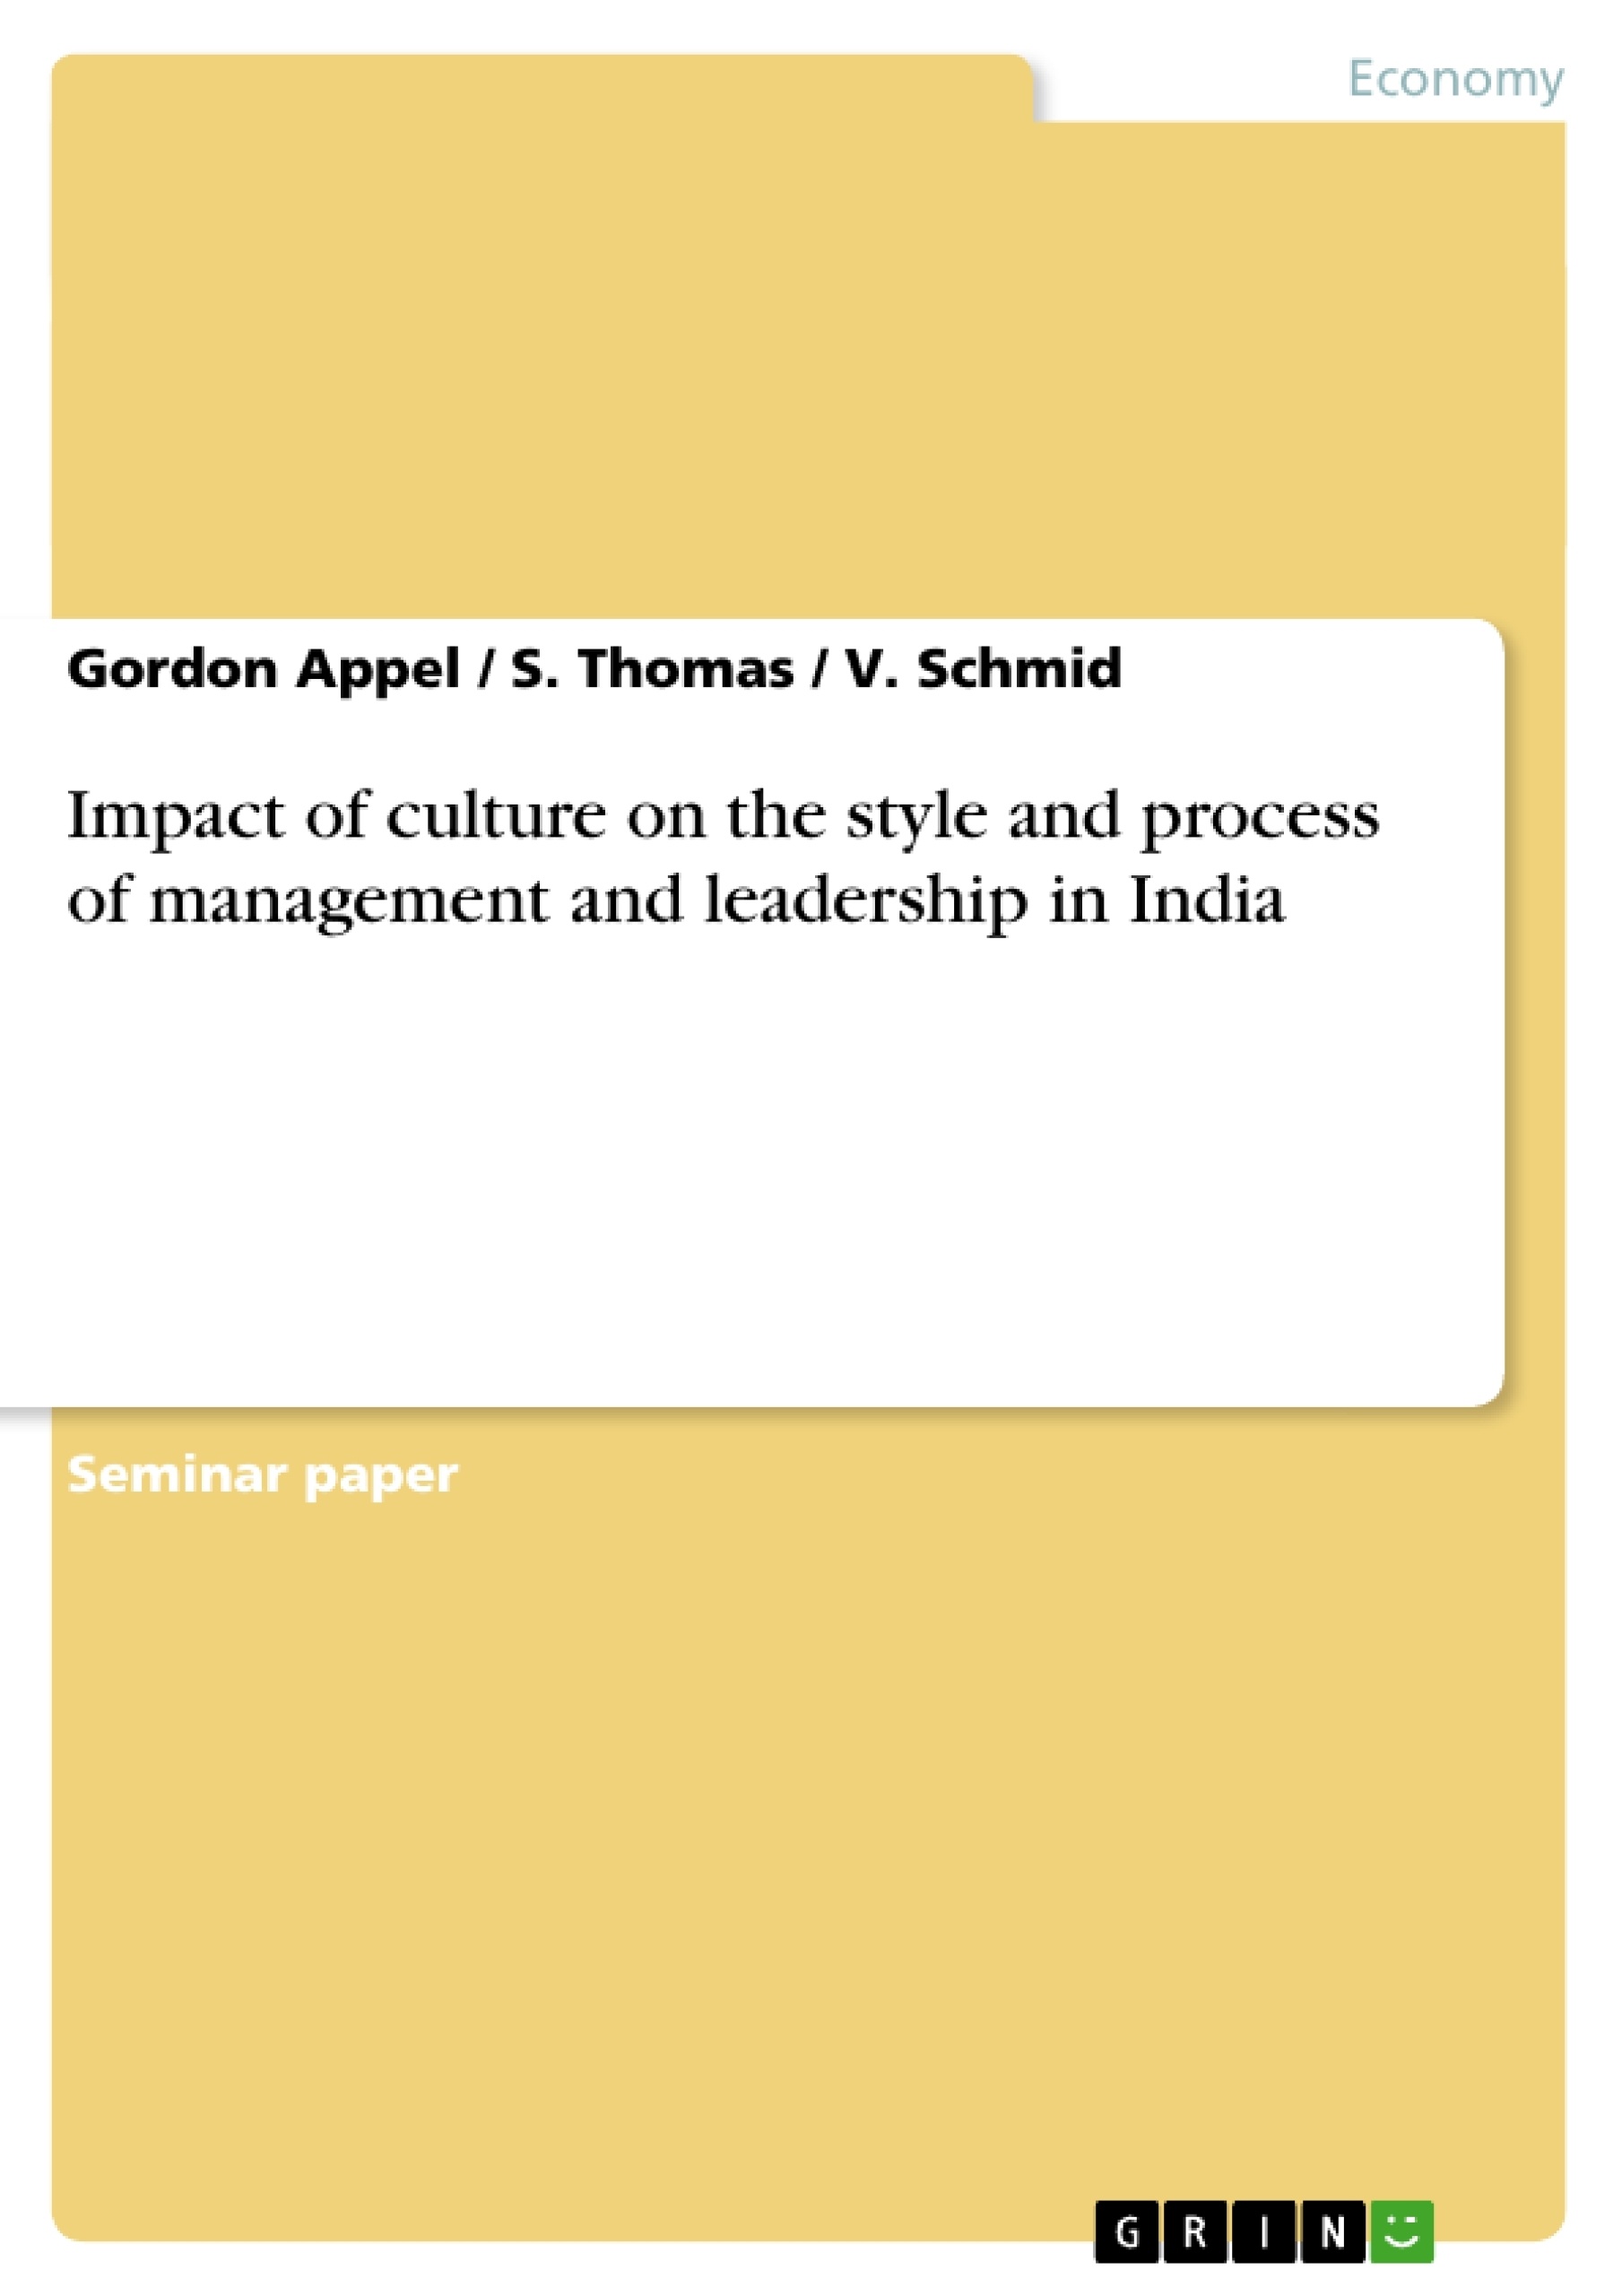 Title: Impact of culture on the style and process of management and leadership in India